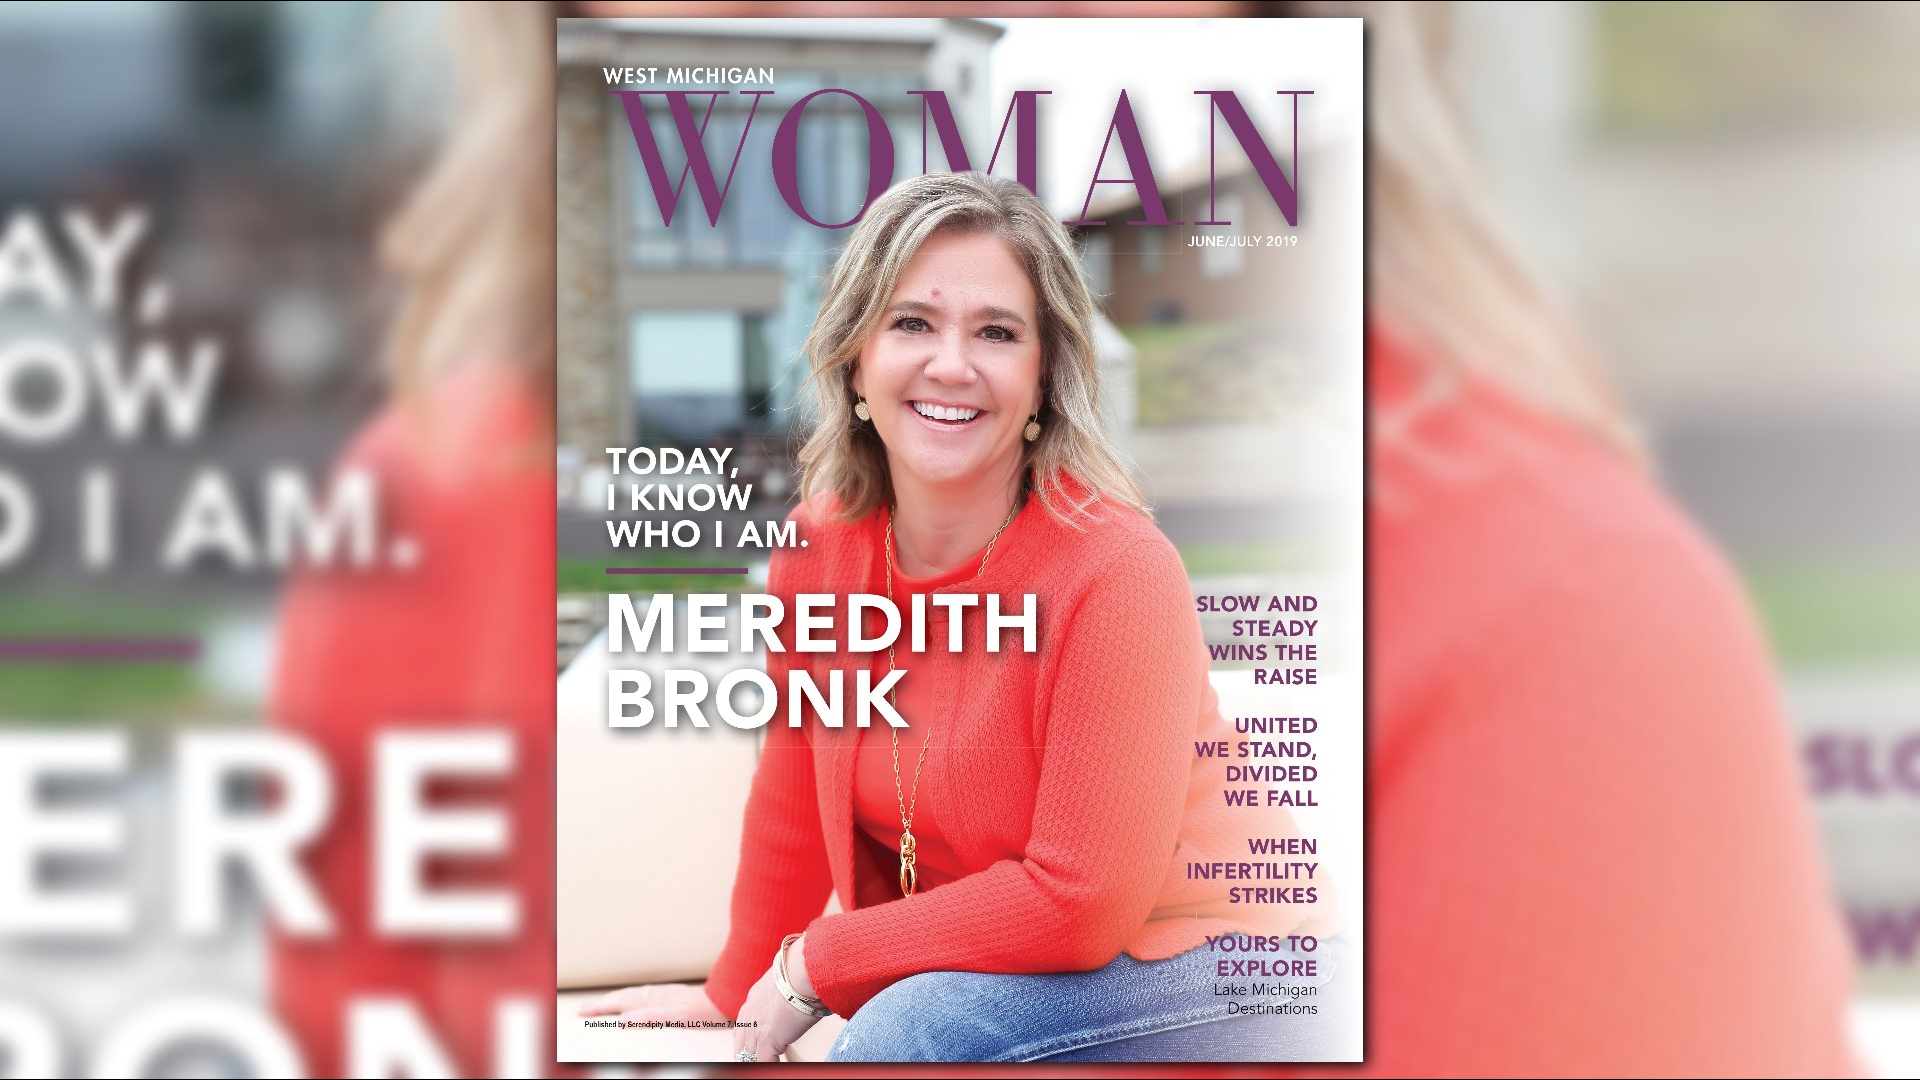 Hear from Woman of the Year winner Meredith Bronk and see what's new in this month's issue of West Michigan Woman magazine.